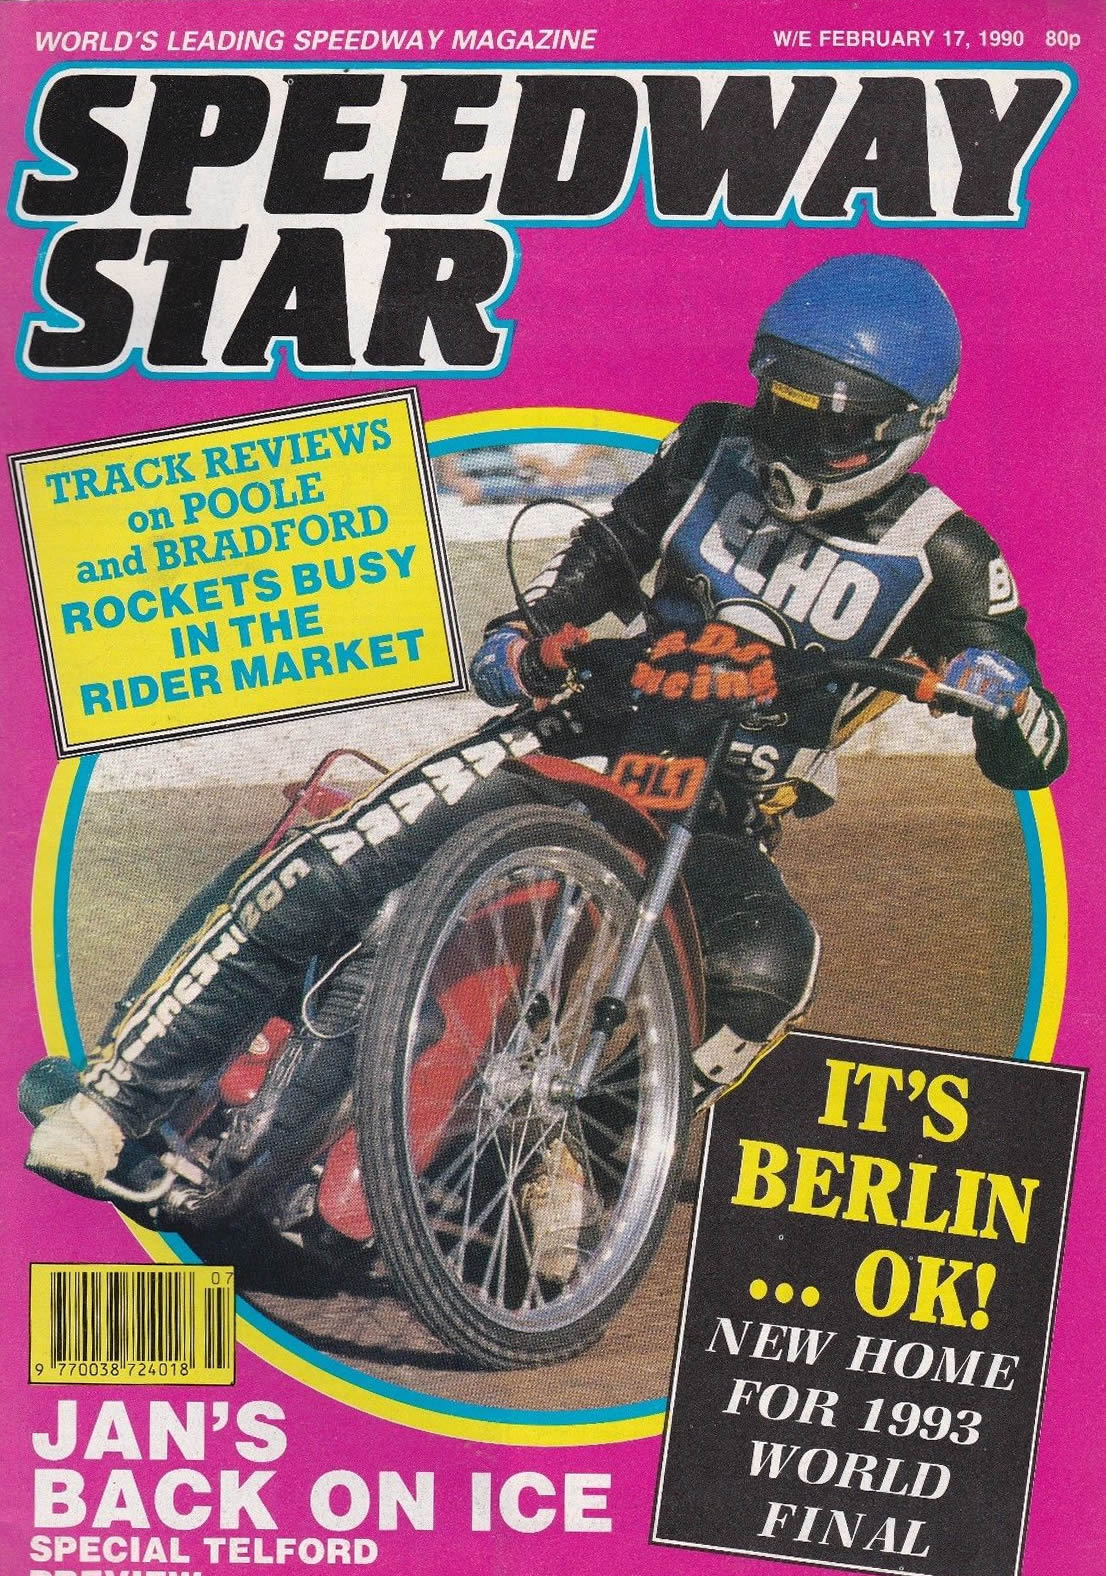 BRITISH FINAL SPECIAL SPEEDWAY STAR MAY 19 1990 